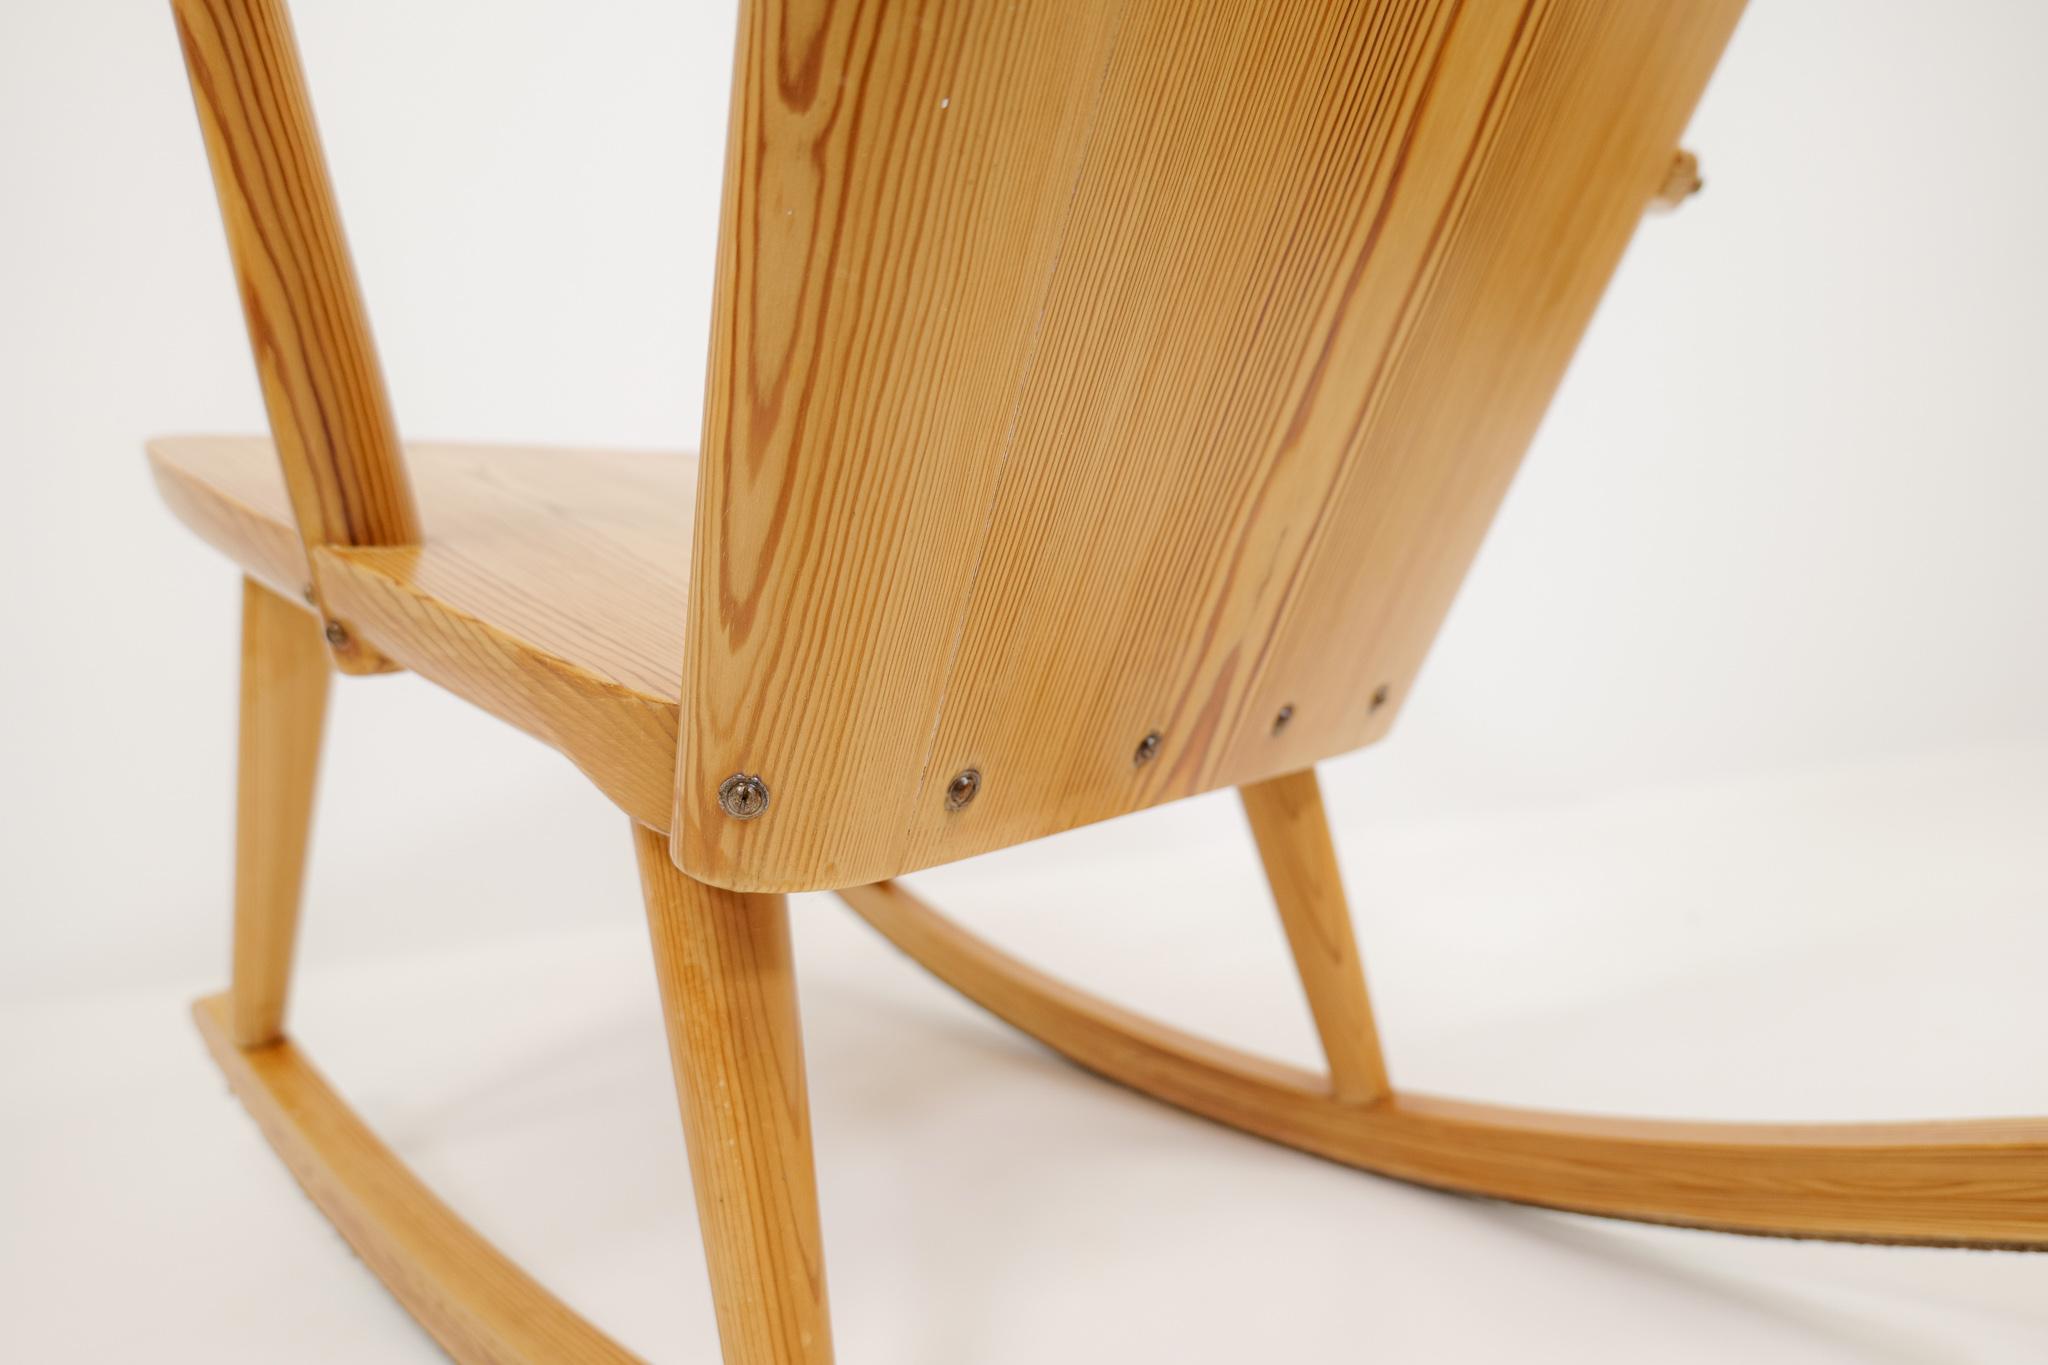 Midcentury Rocking Chair in Pine, Göran Malmvall, Sweden, 1940s For Sale 3